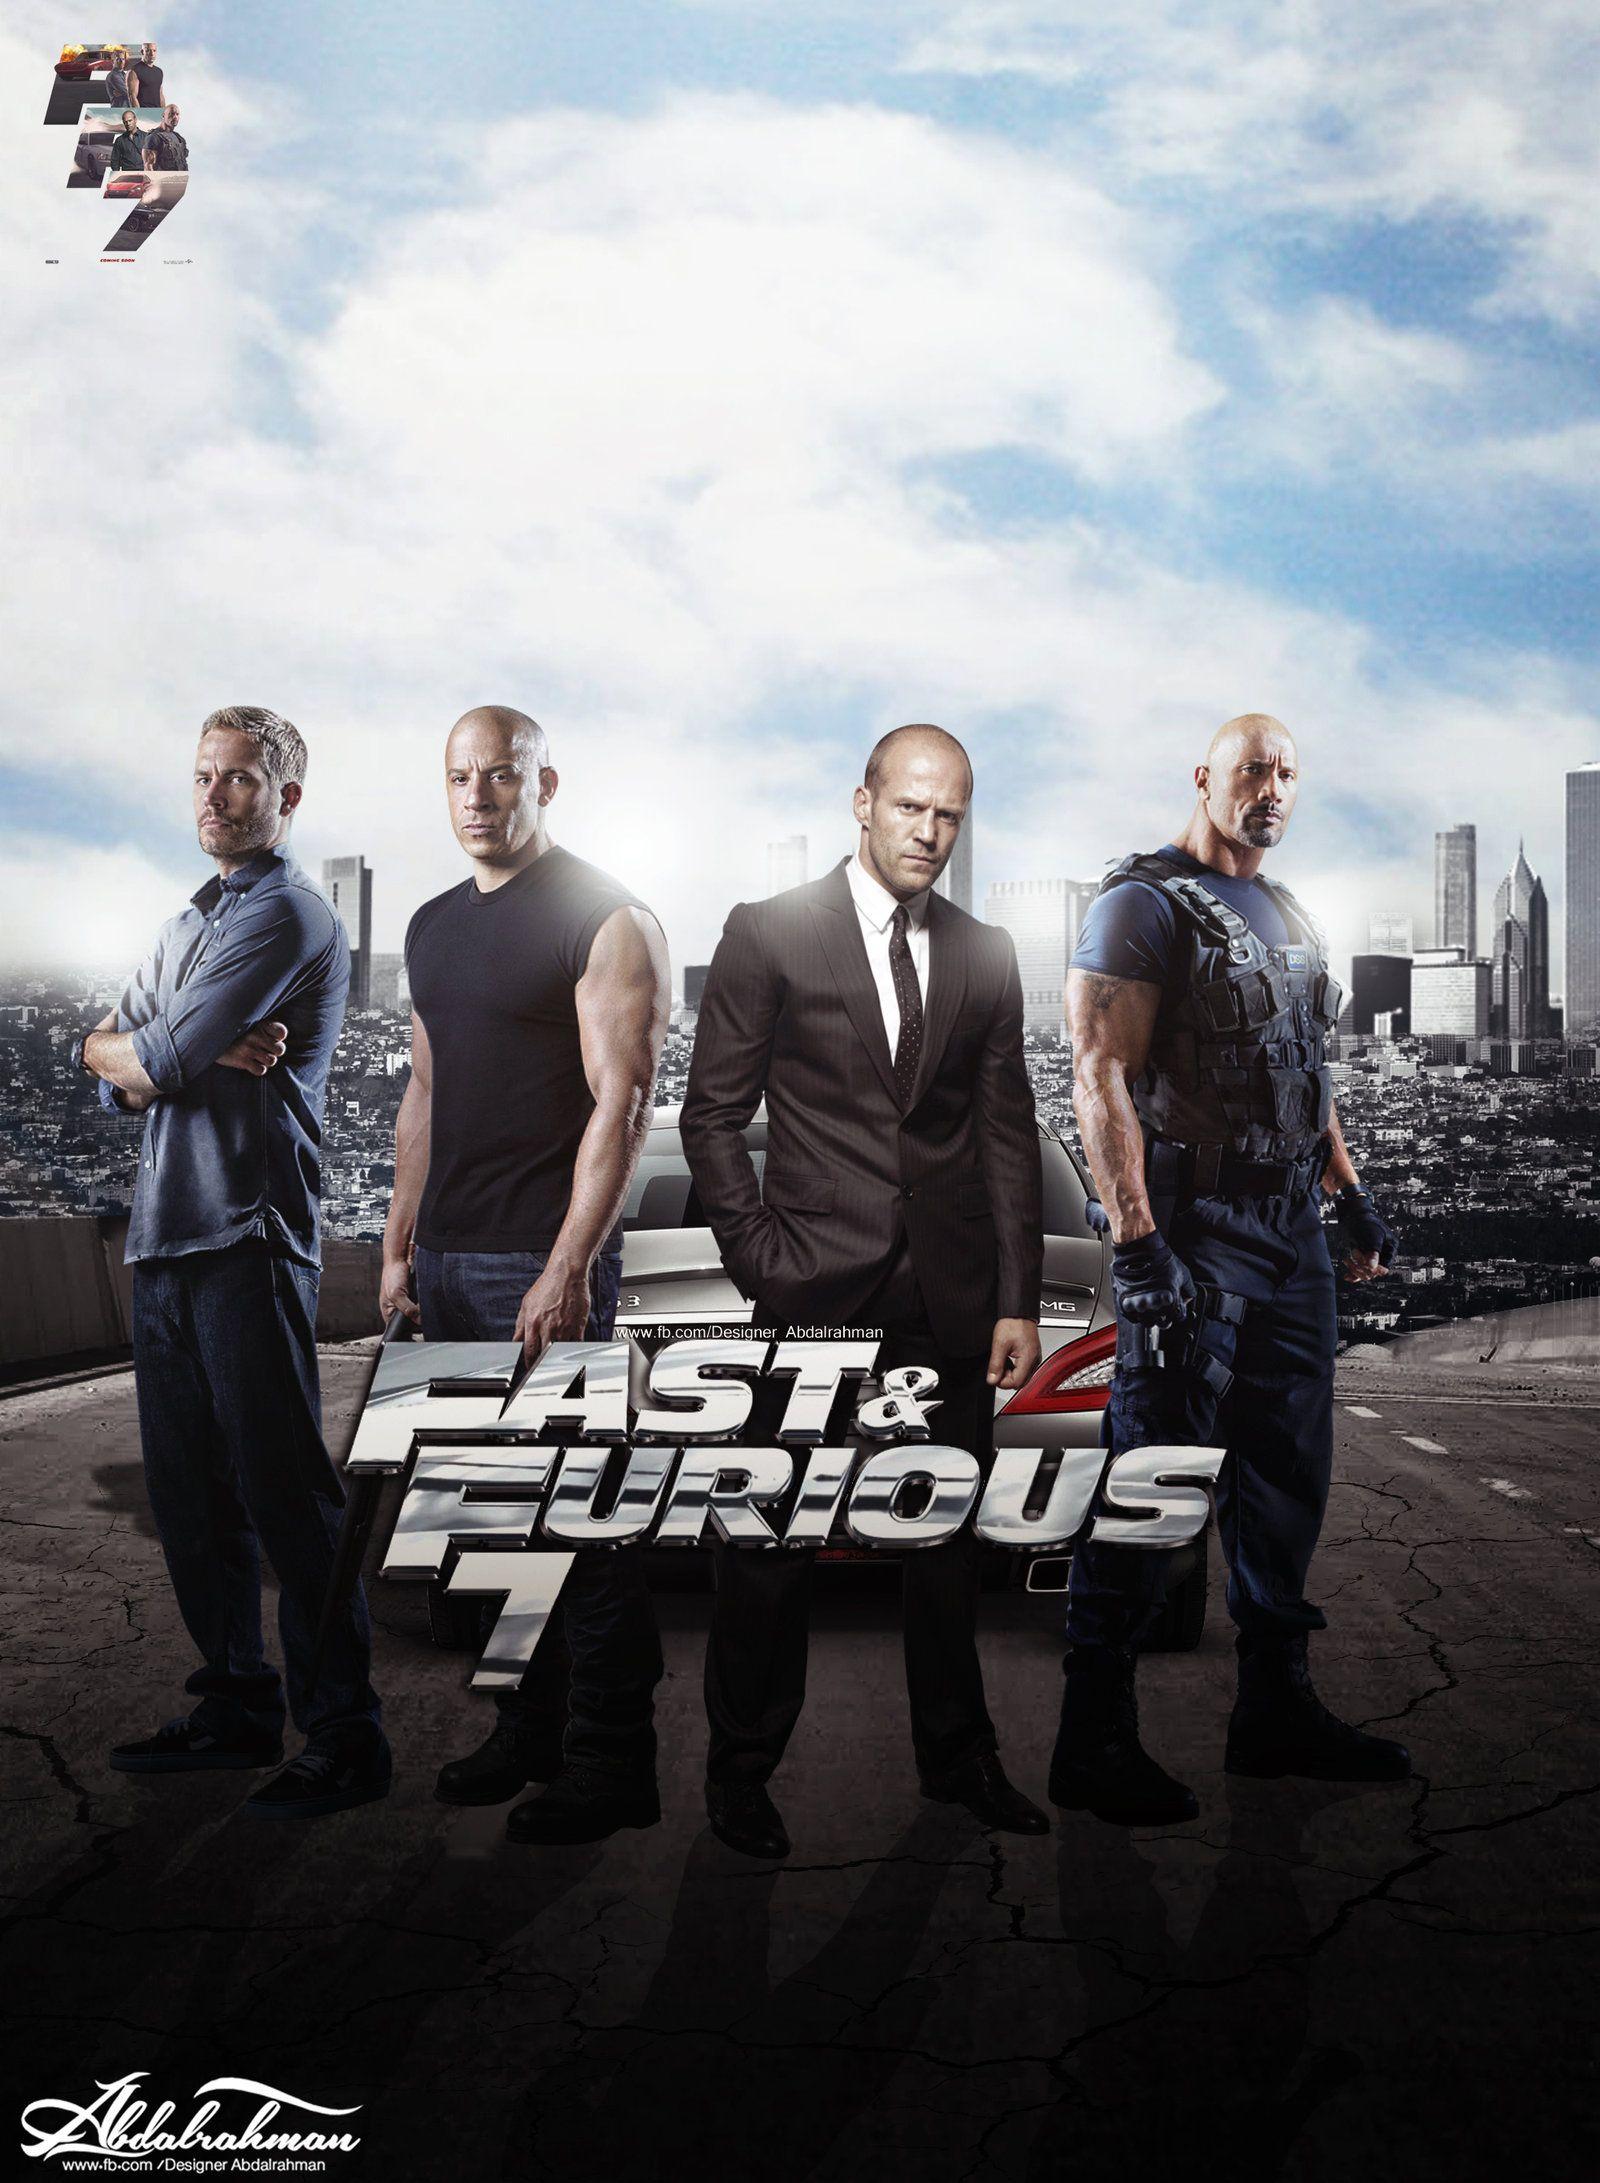 Fast And Furious 7 Wallpaper, HD Creative Fast And Furious 7